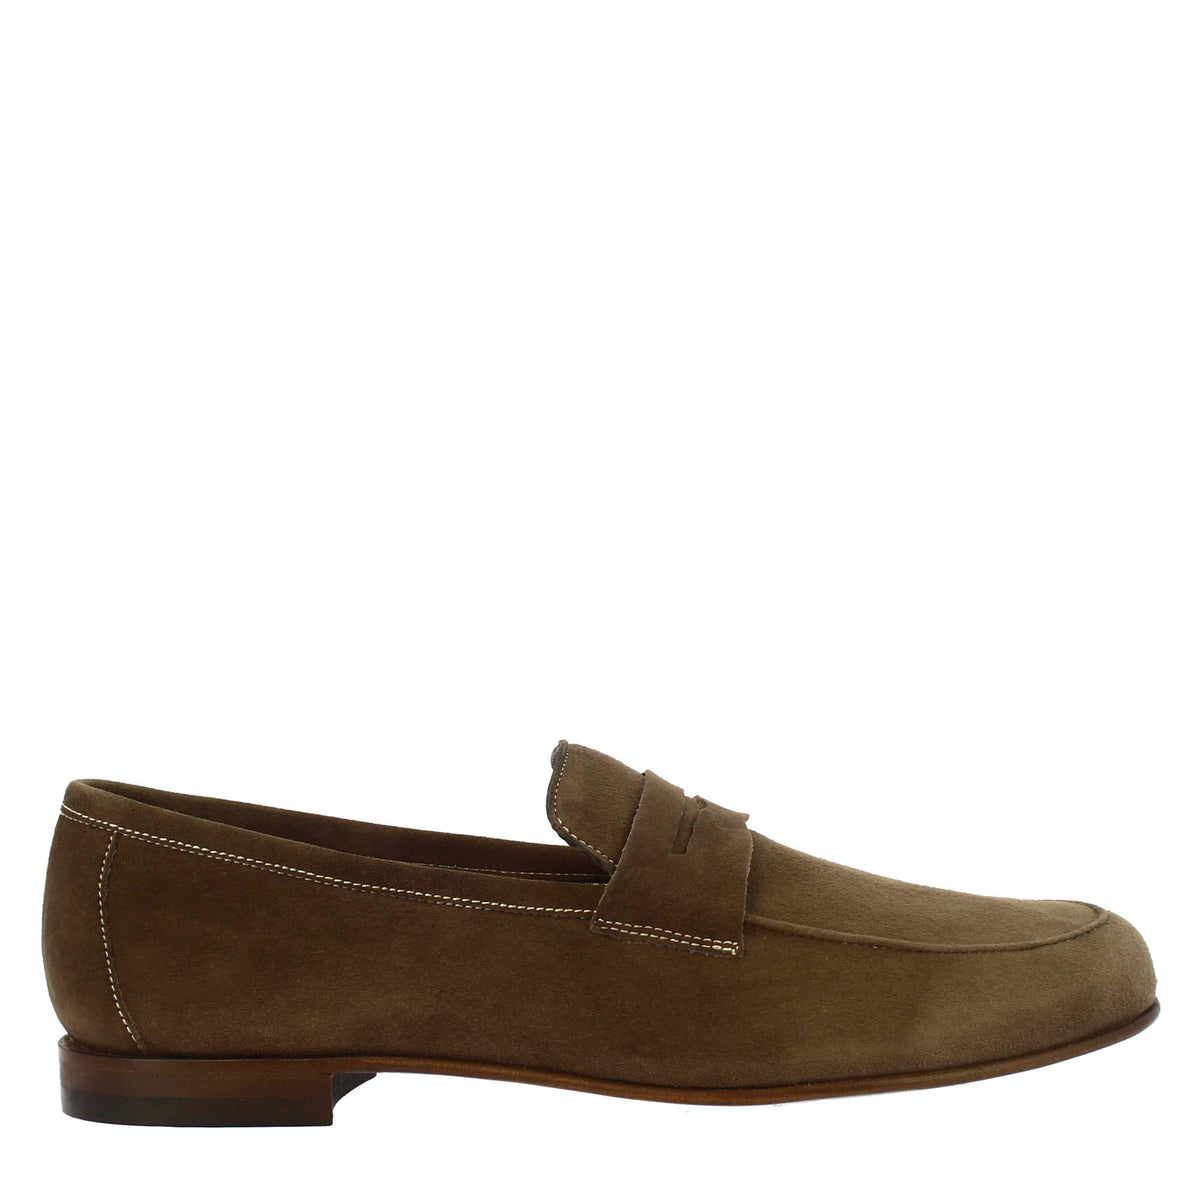 Handmade men's slip-on loafers in taupe suede leather